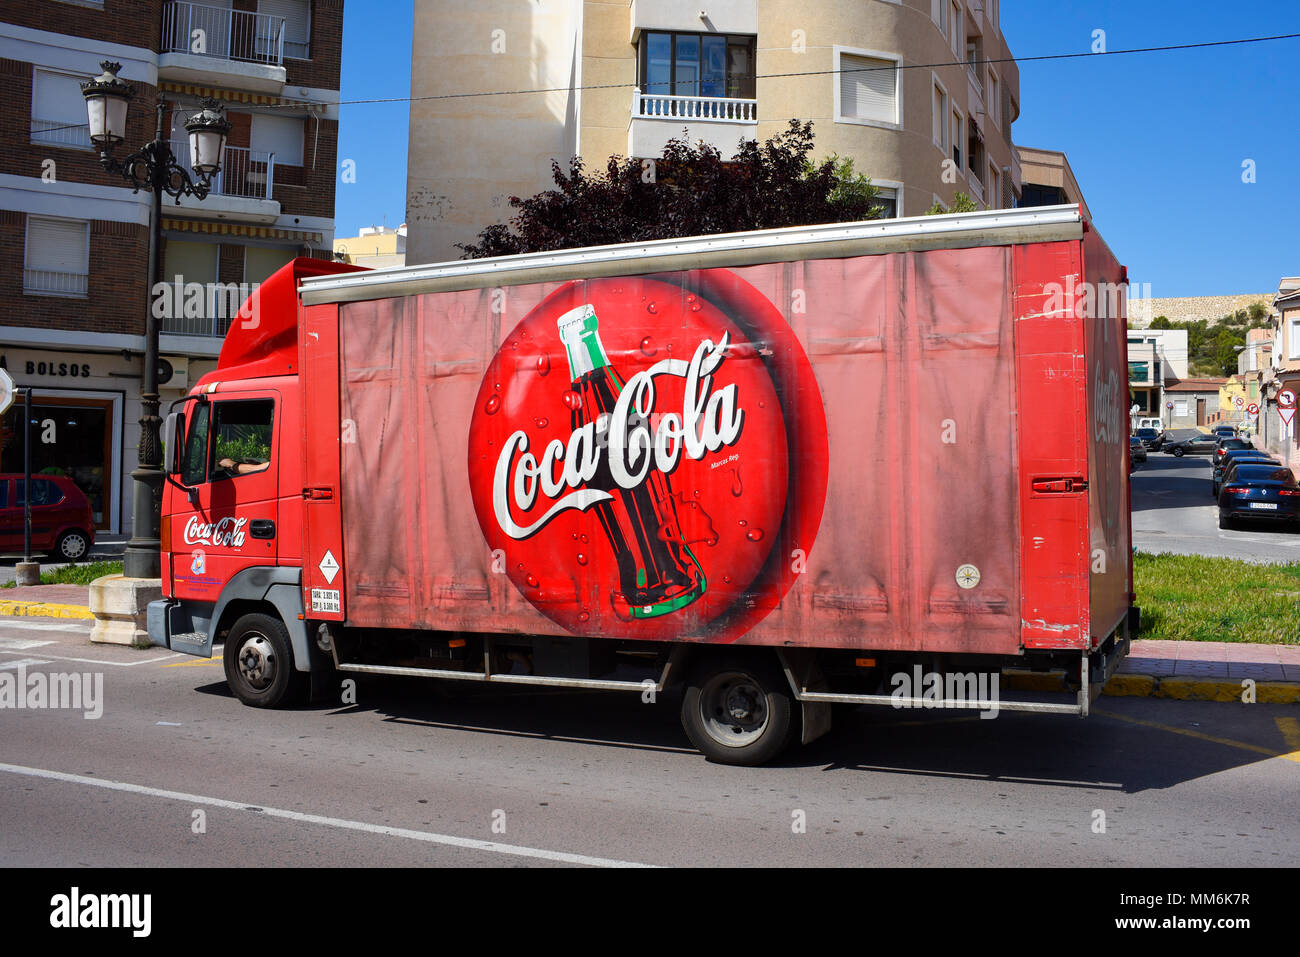 Coca Cola delivery truck lorry in Guardamar, Spain. Old curtain side vehicle with faded sides. Vintage coke bottle brand logo. Classic glass bottle Stock Photo